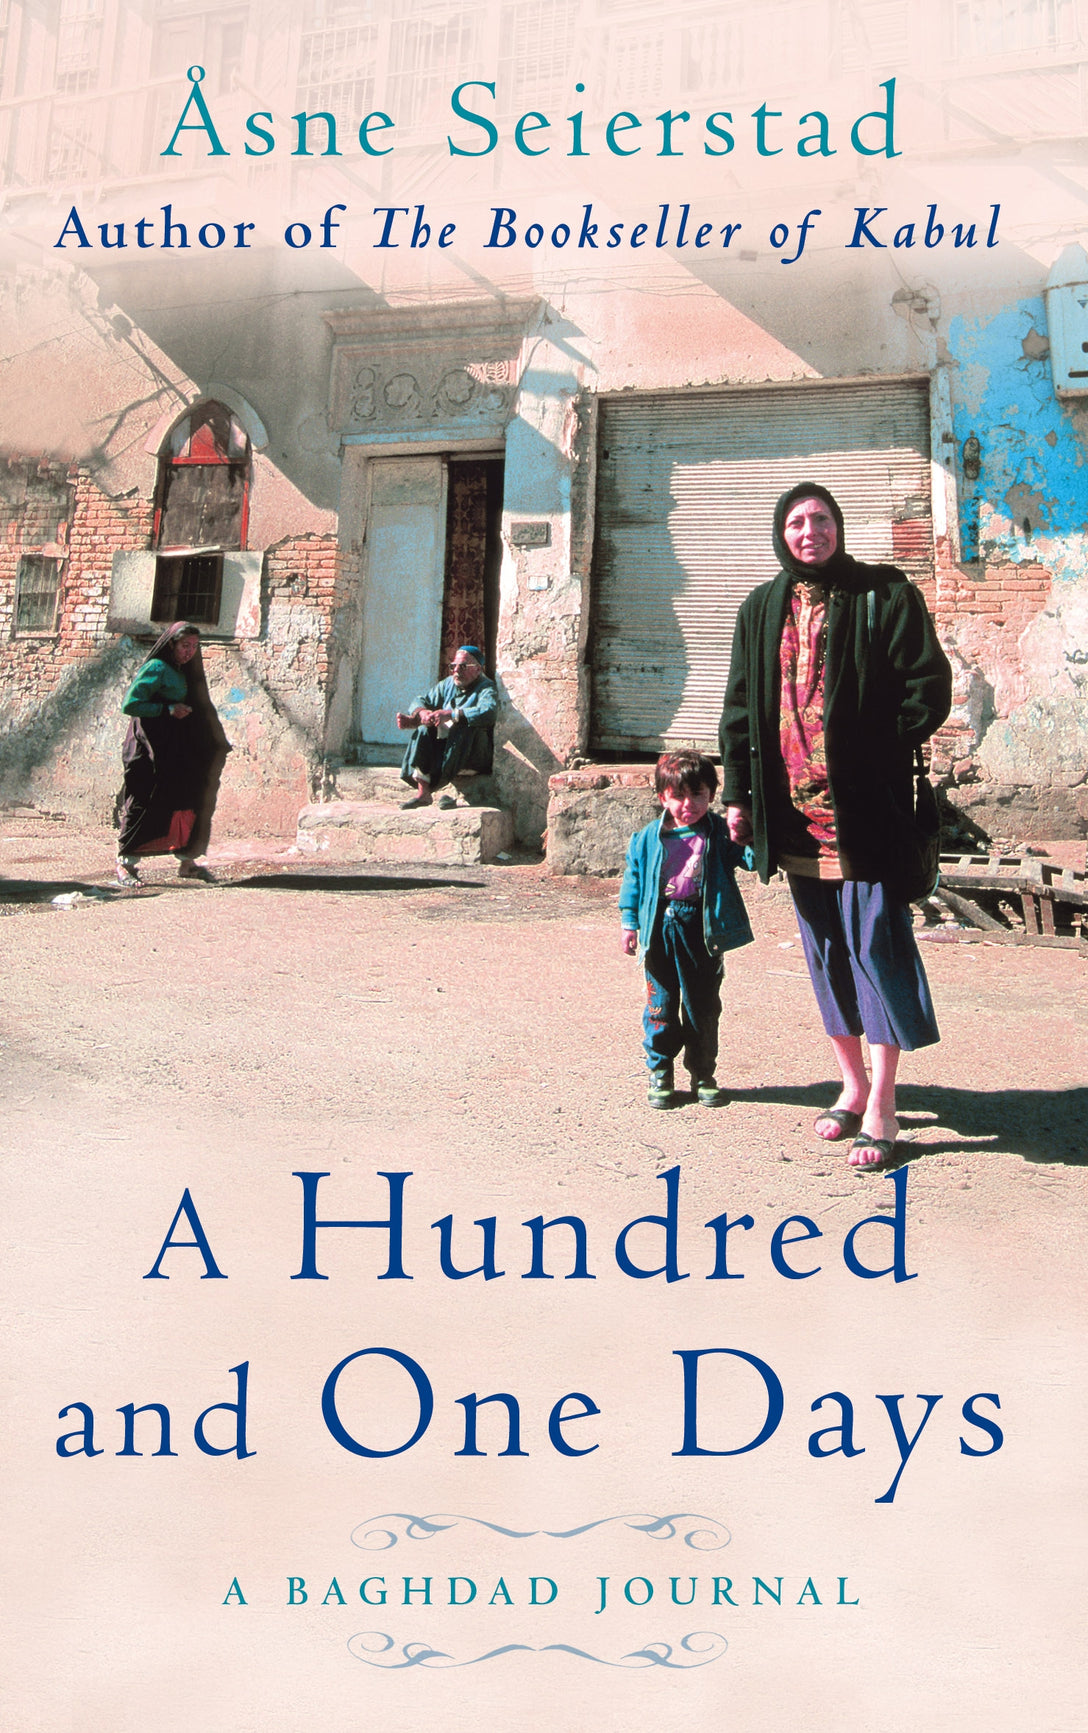 A Hundred And One Days by Åsne Seierstad